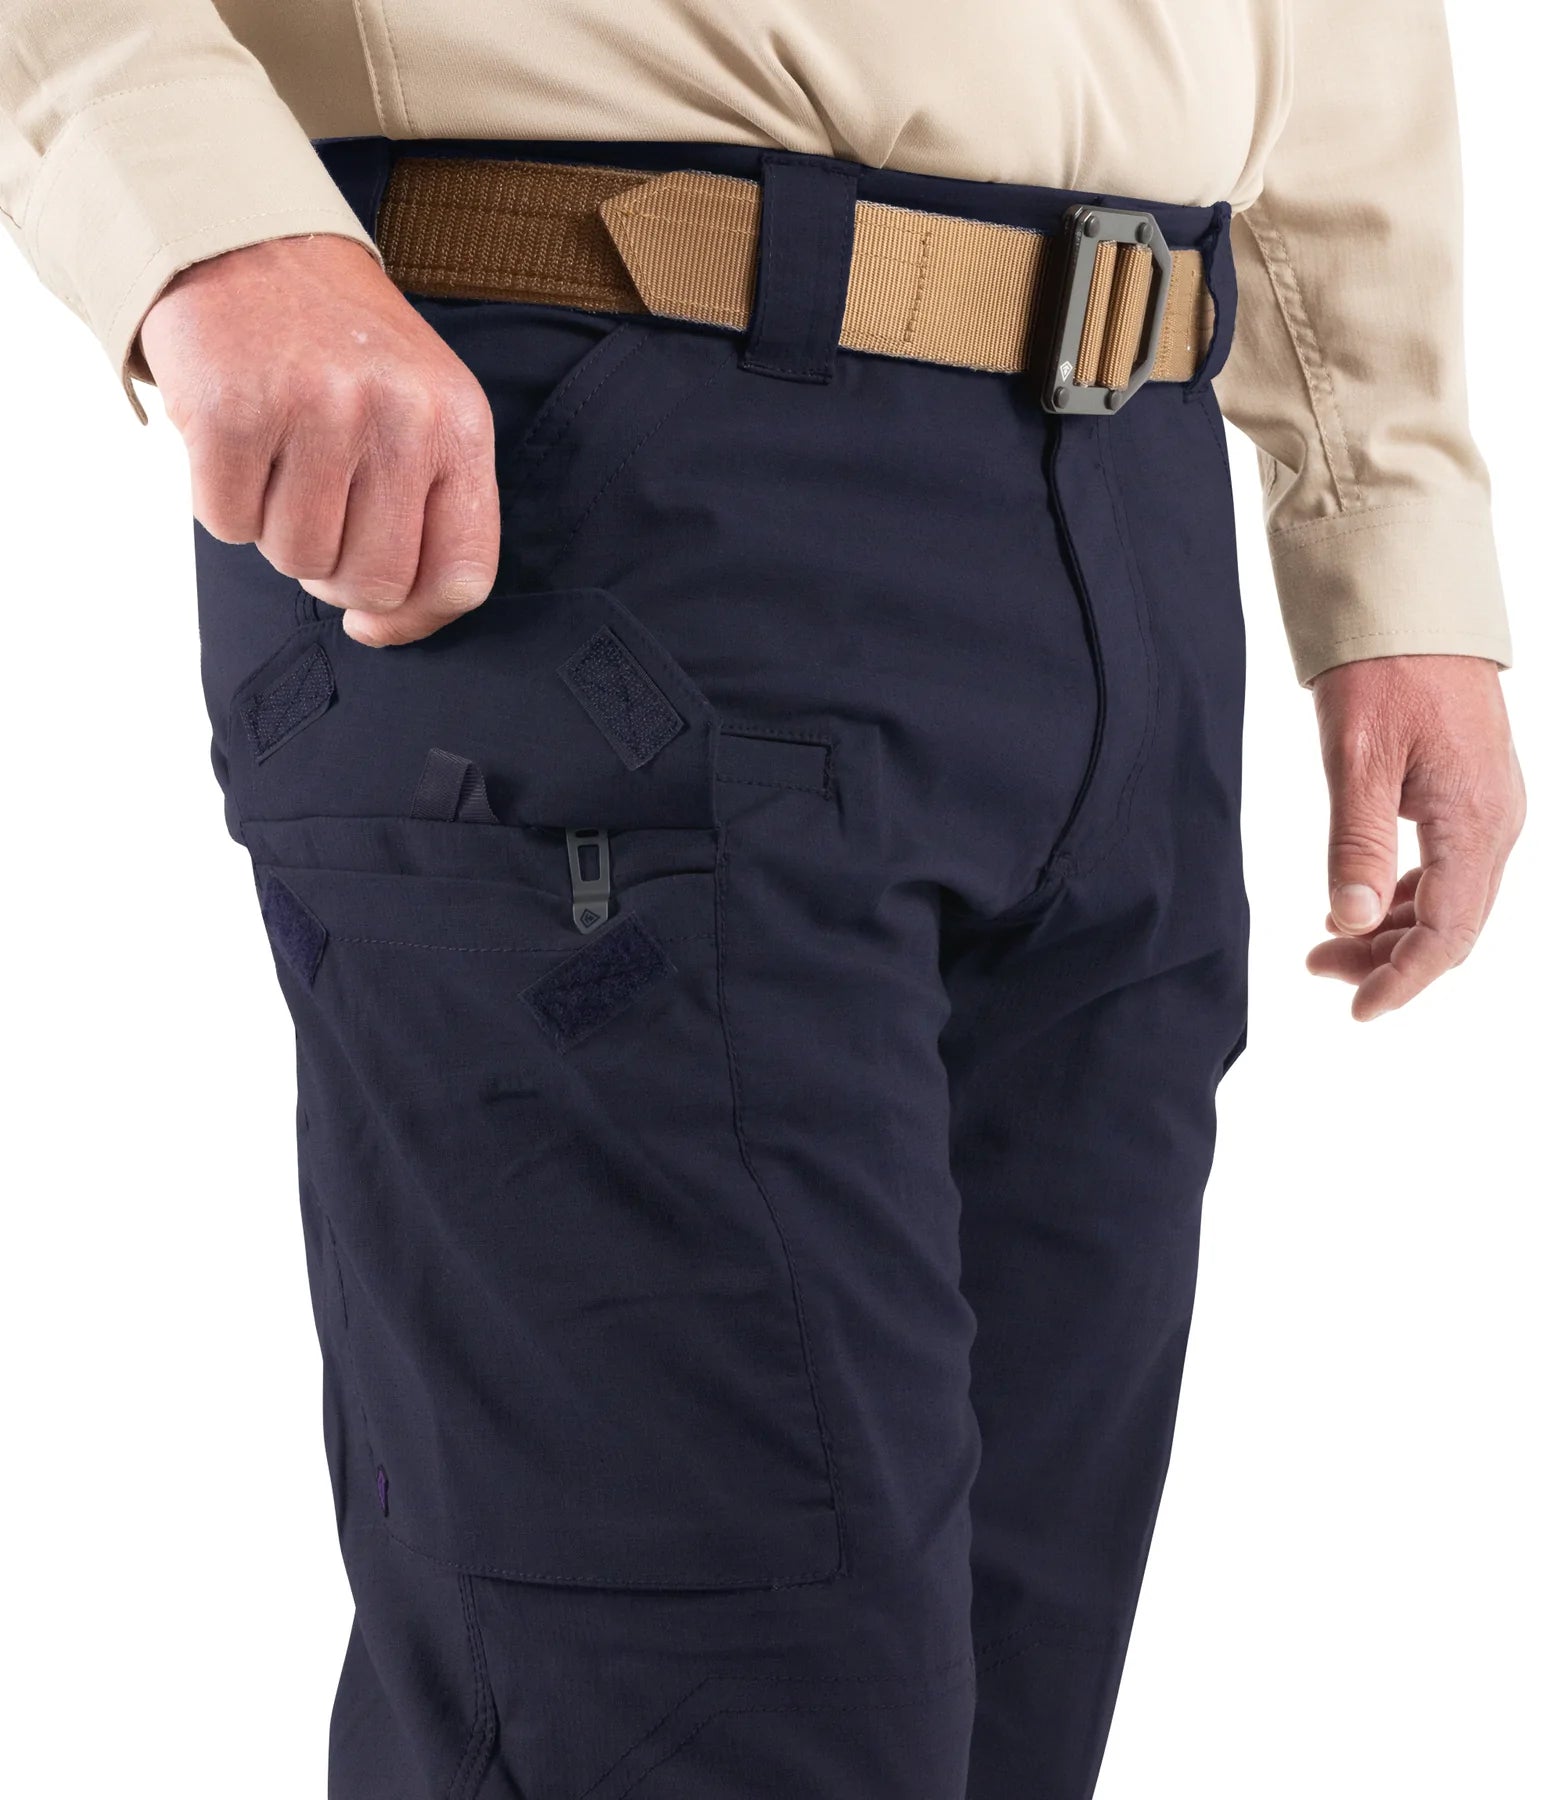 First Tactical Men's V2 Tactical Pants (114011) Midnight Navy / Coyote Brown